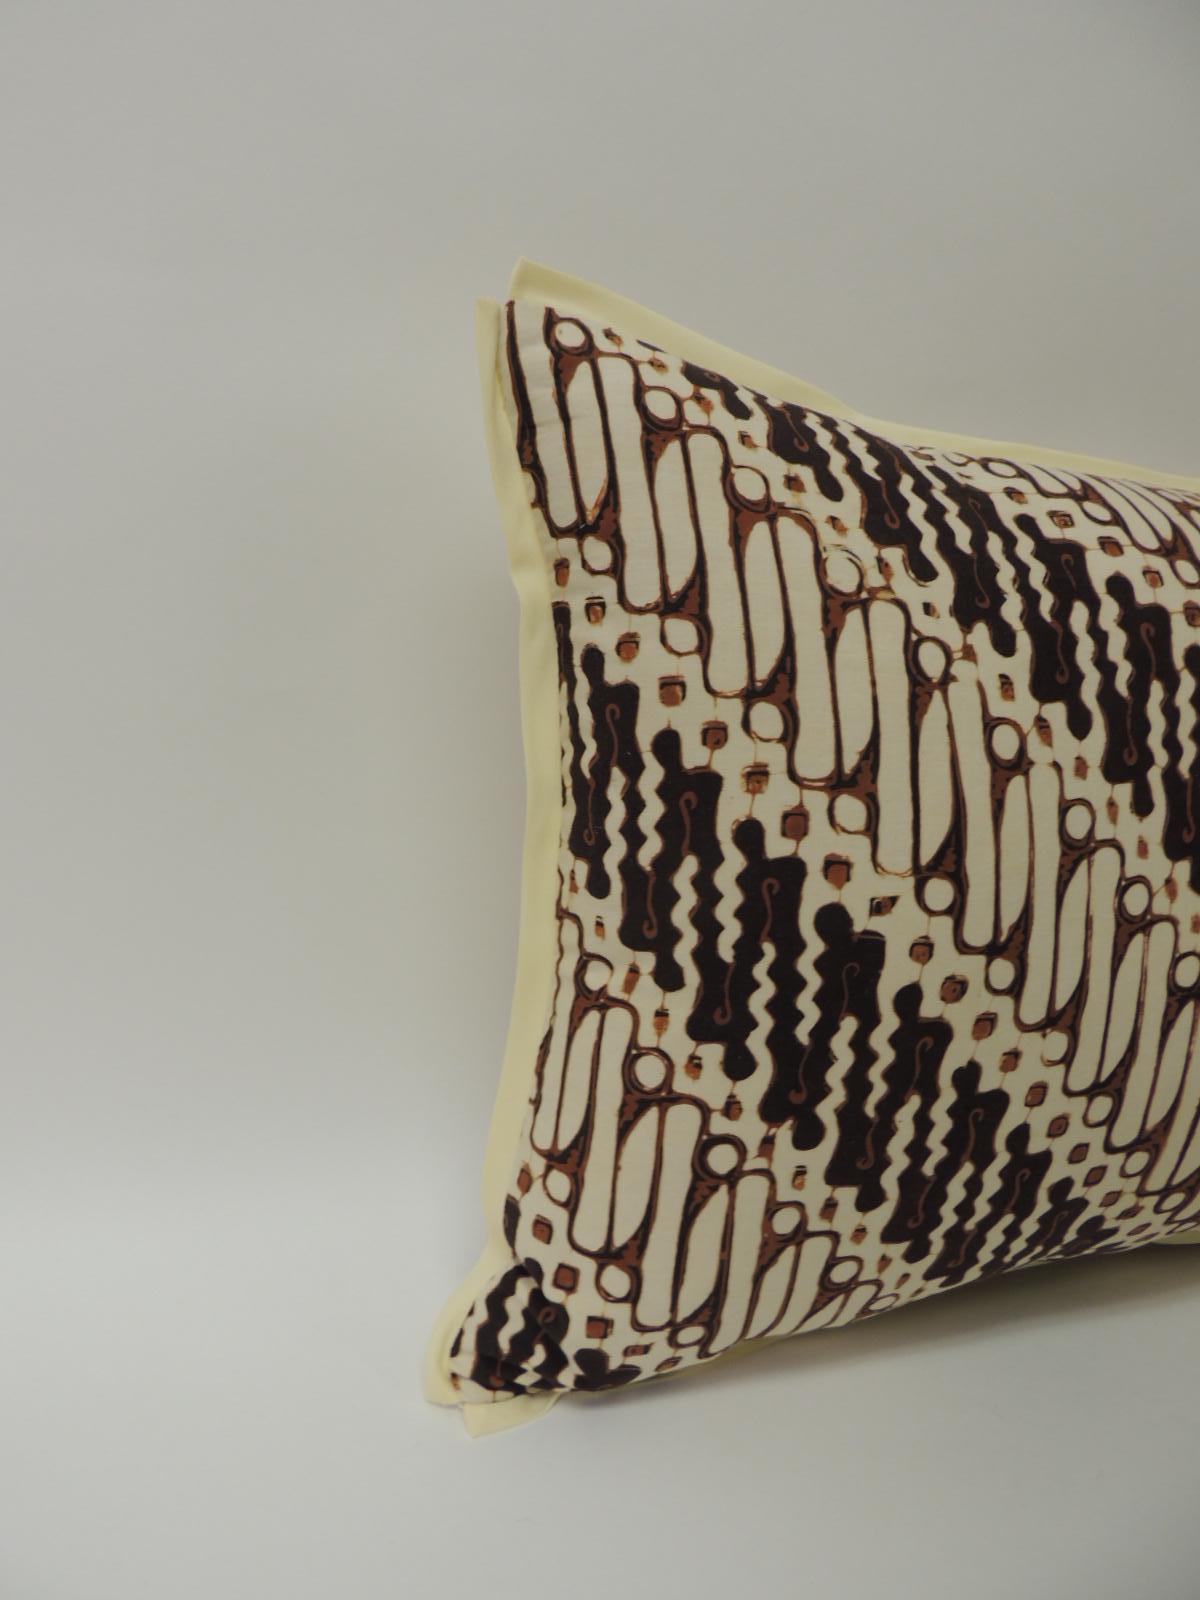 Vintage beige, brown and black Batik decorative lumbar pillow handcrafted with 1970s vintage lumbar hand-blocked Batik artisanal textile panel with the traditional tribal design in shades of brown, black, natural and with a mocha color detail.